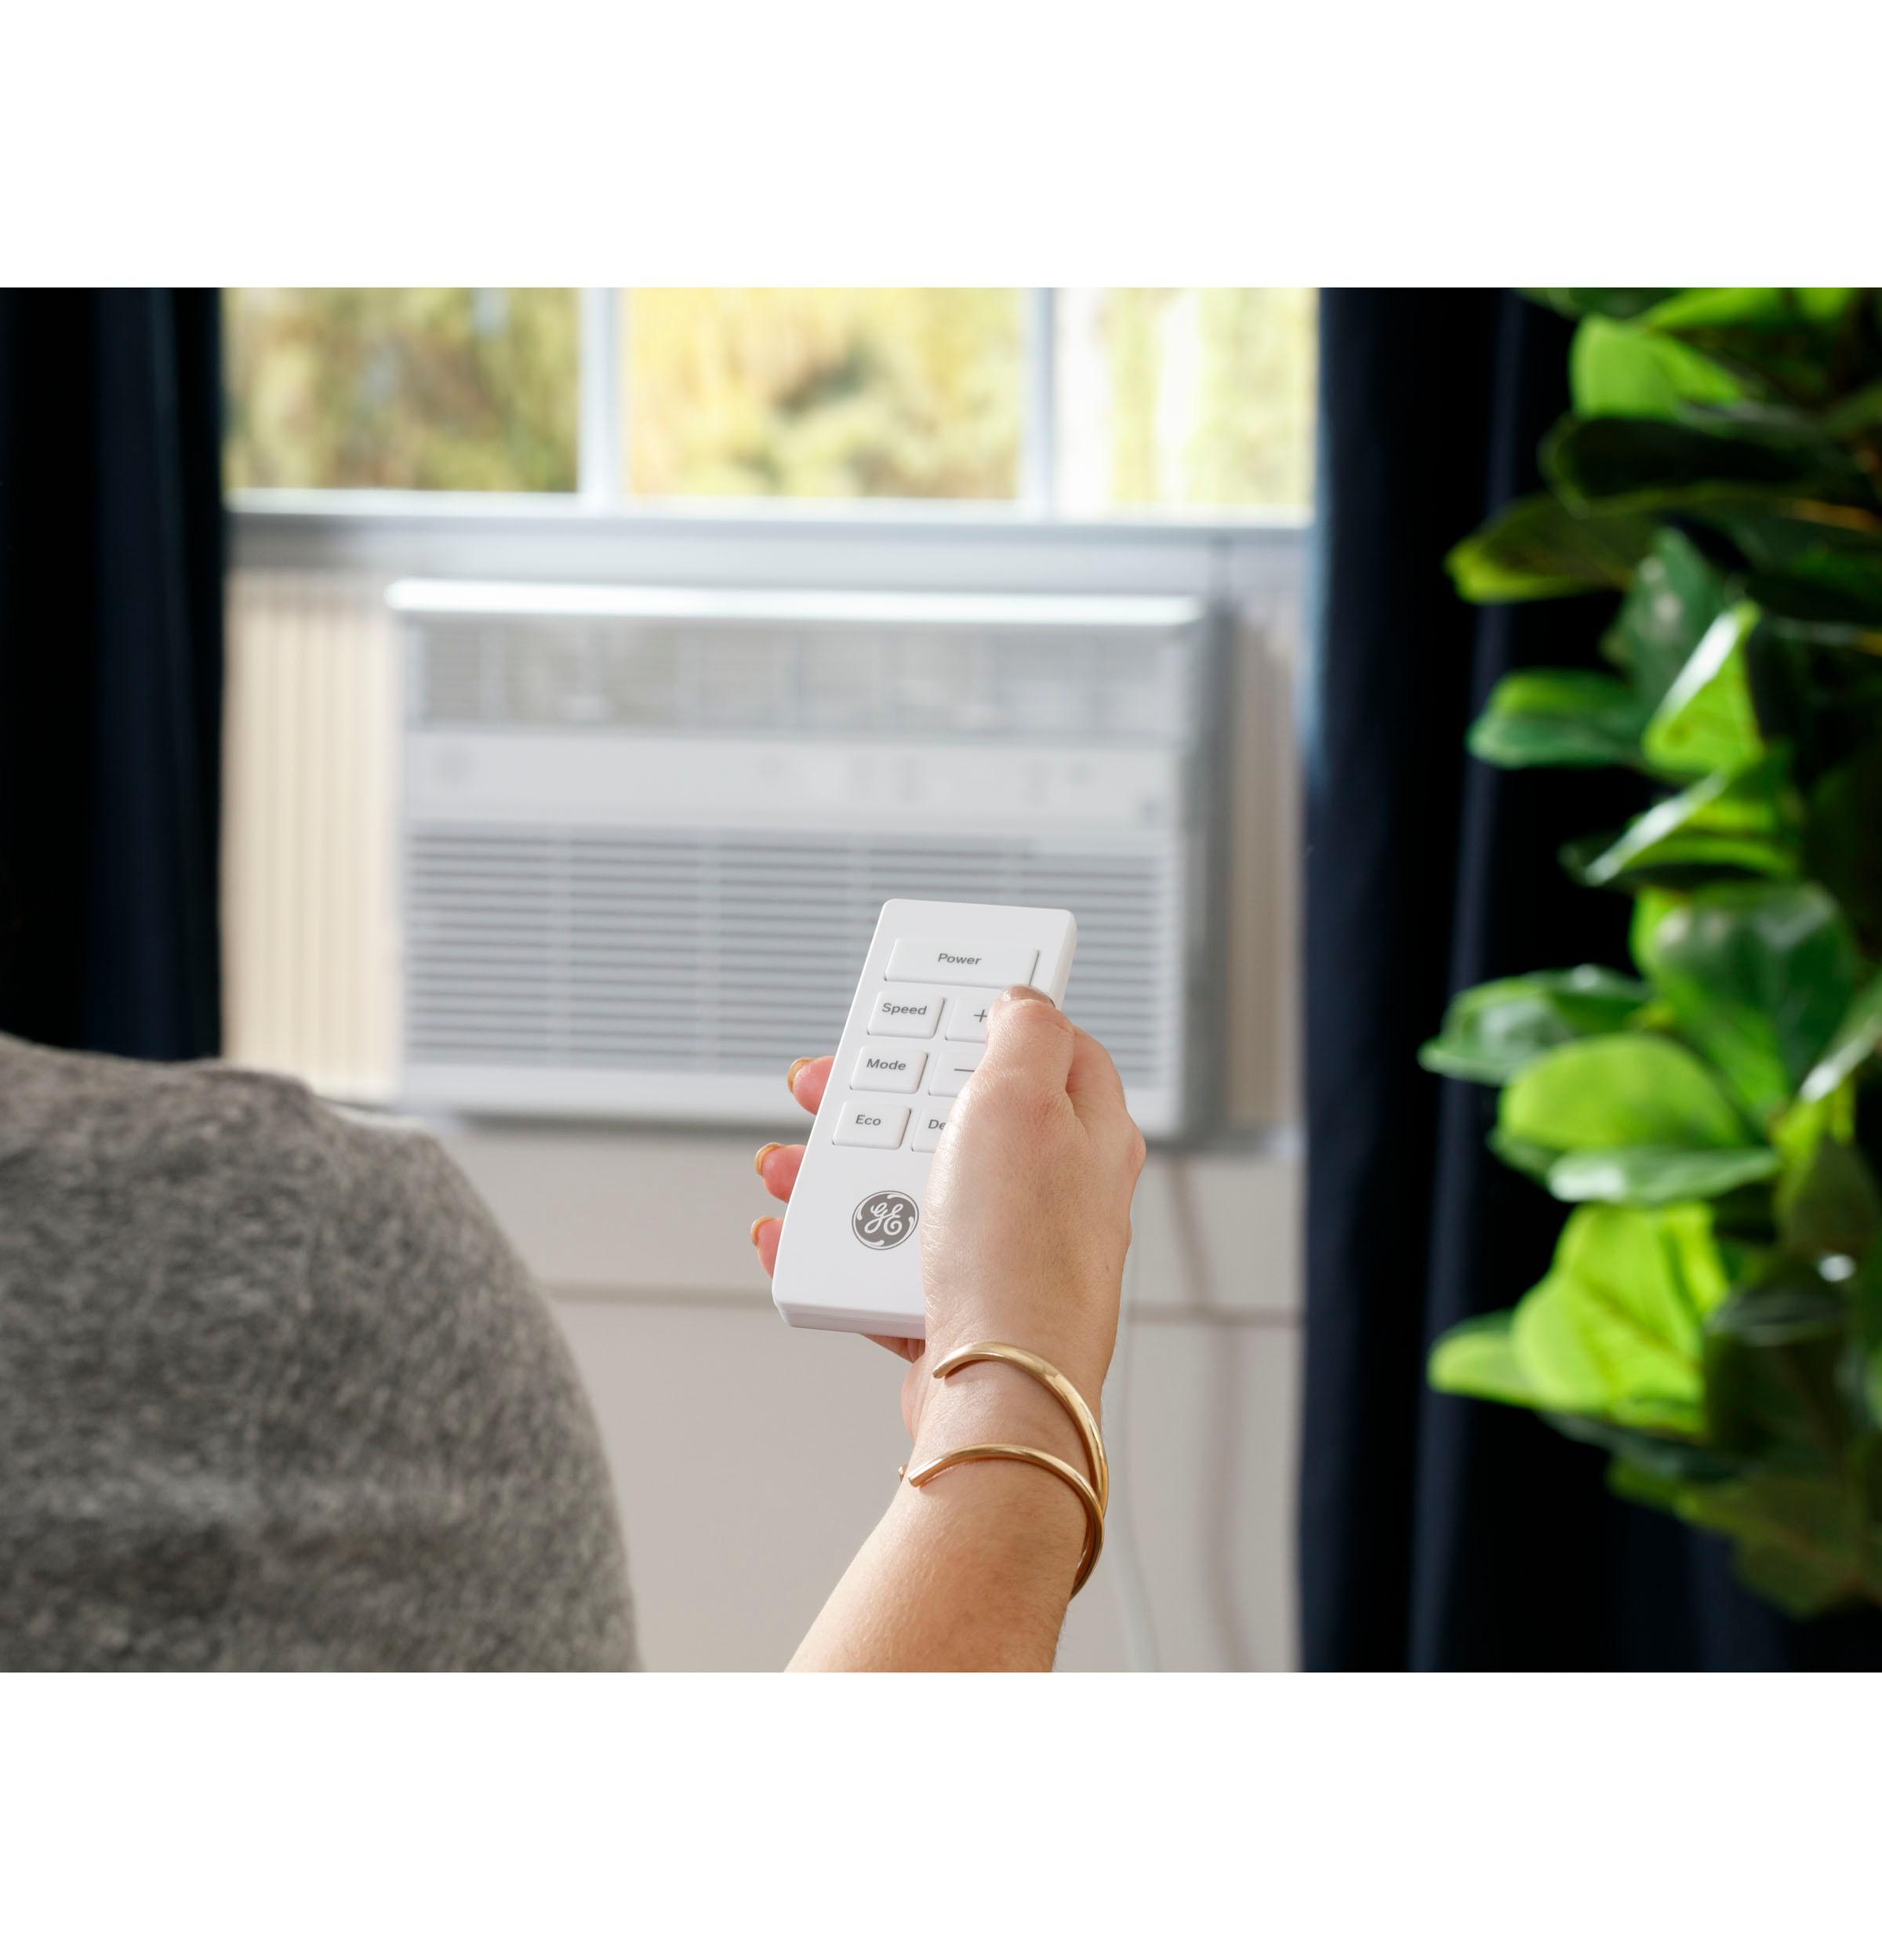 GE® 23,500 BTU Heat/Cool Electronic Window Air Conditioner for Extra-Large Rooms up to 1,500 sq. ft.